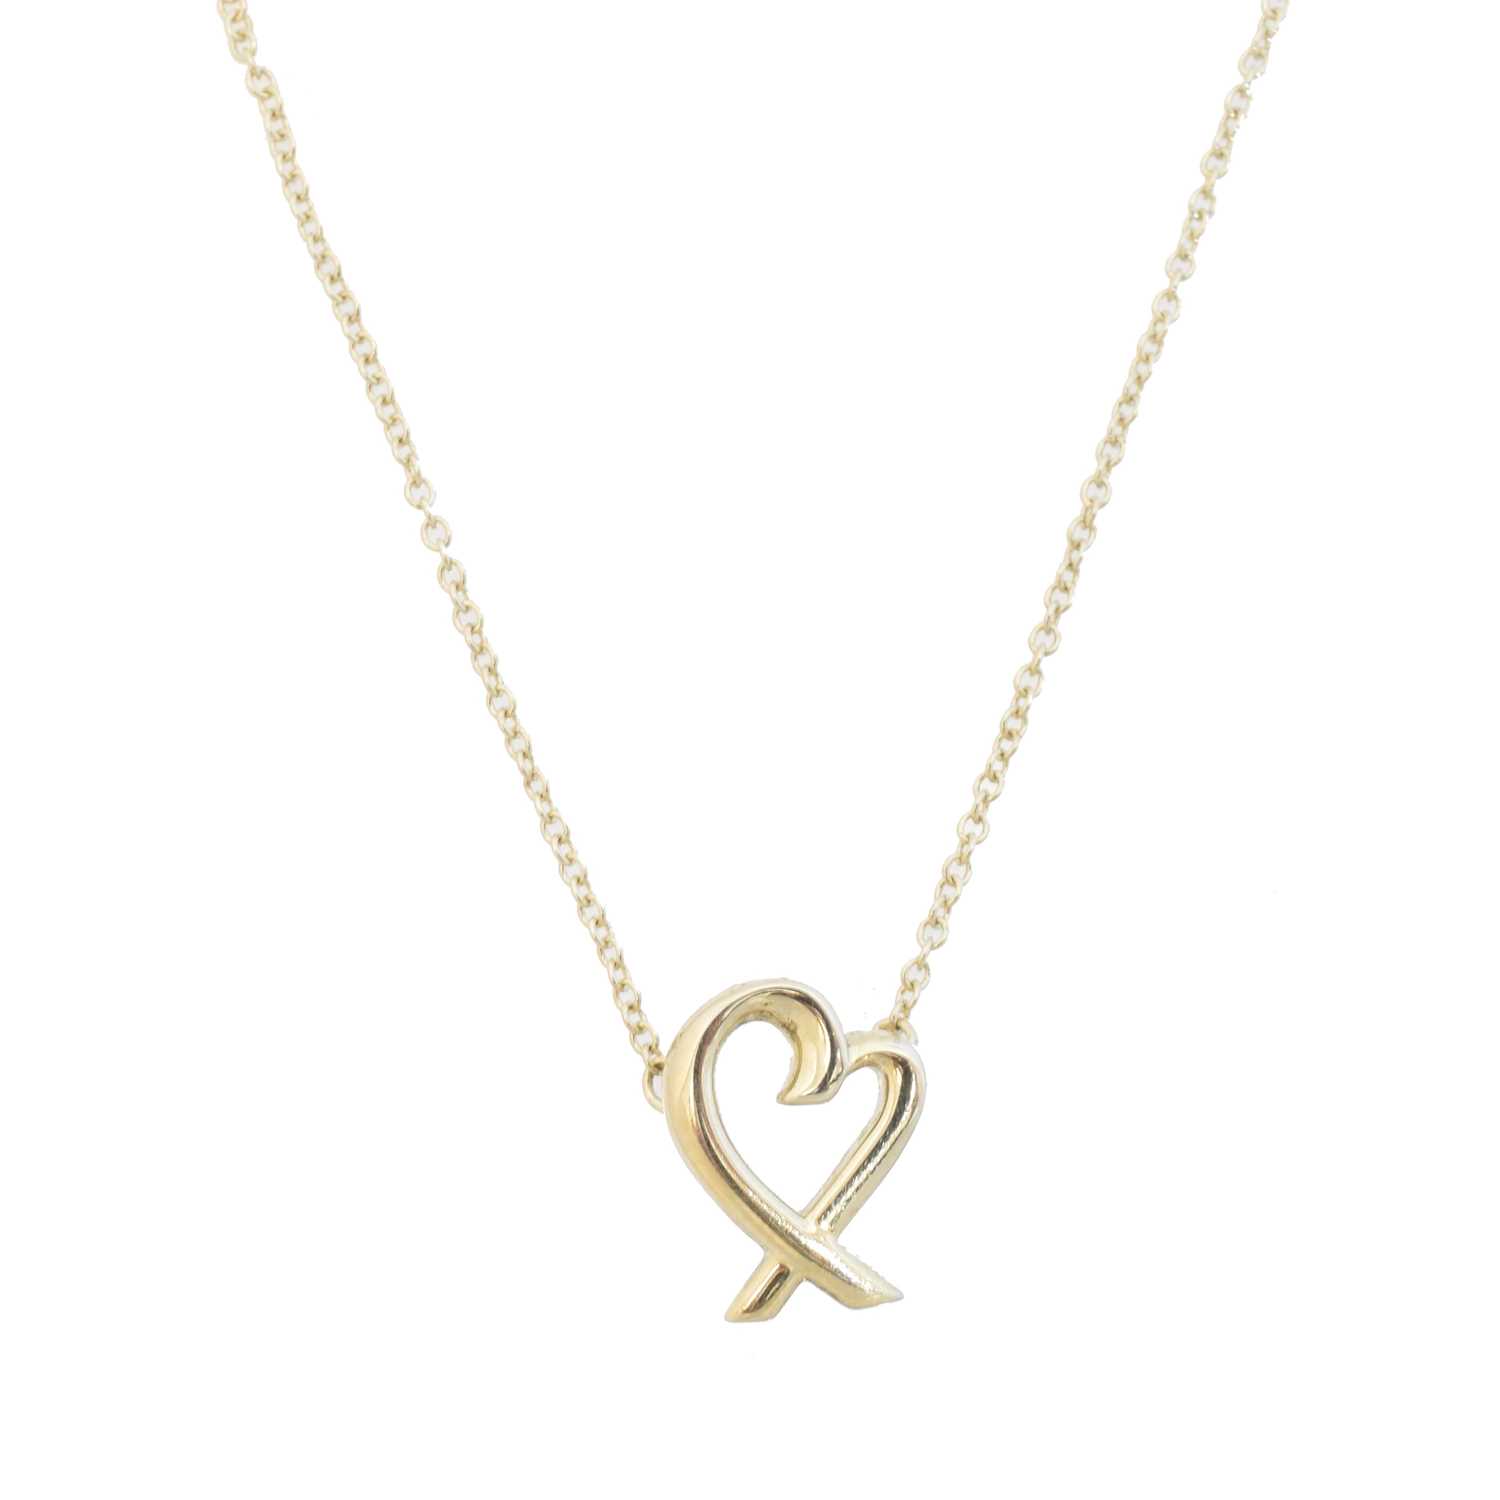 A 'Loving Heart' necklace by Paloma Picasso for Tiffany & Co.,